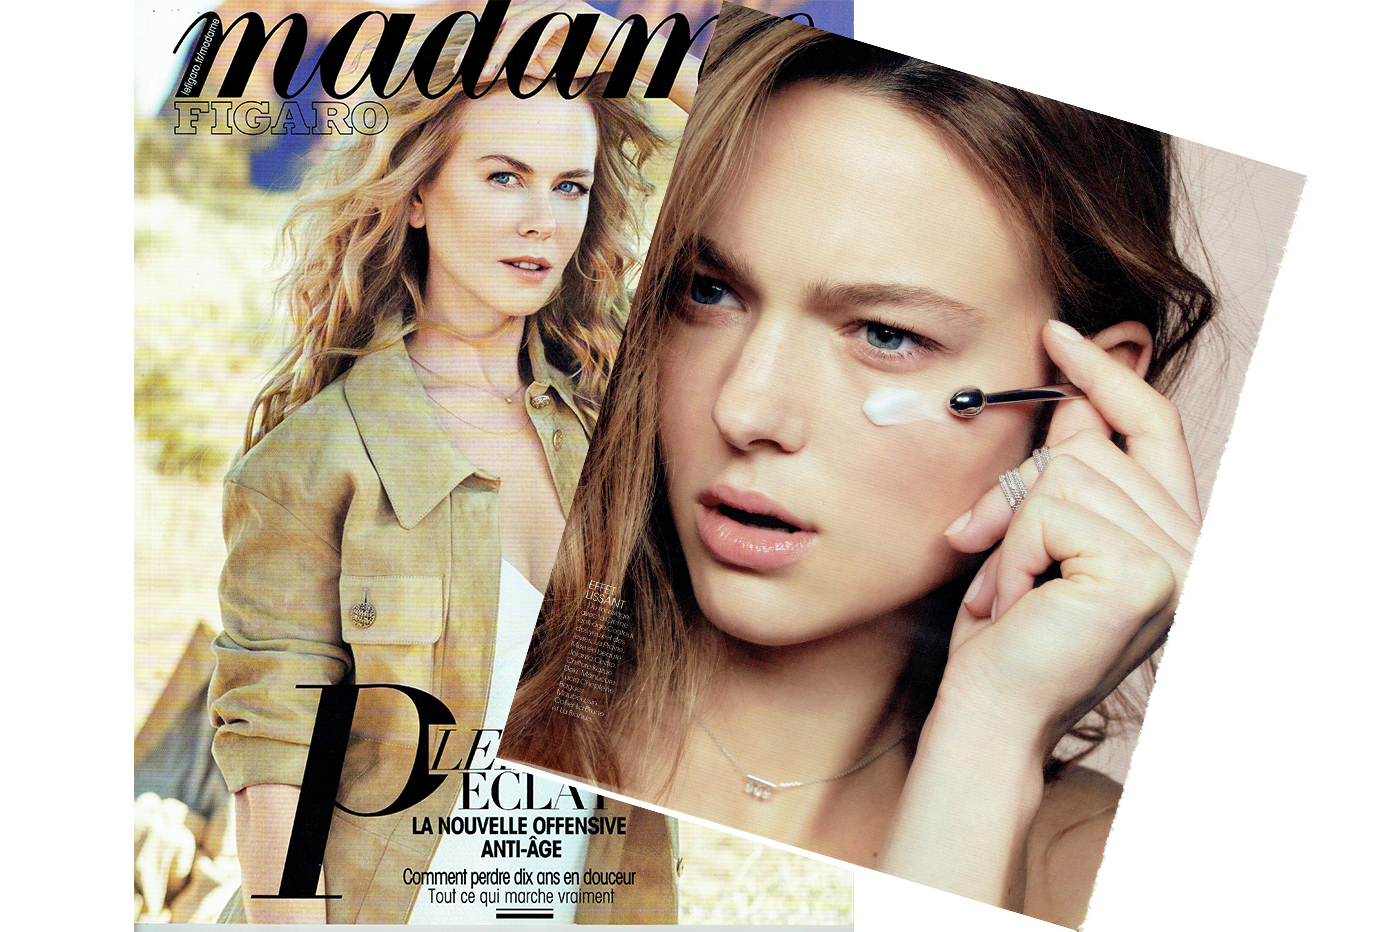 THE PAMPILLES NECKLACE IN THE BEAUTY PAGES – MADAME FIGARO